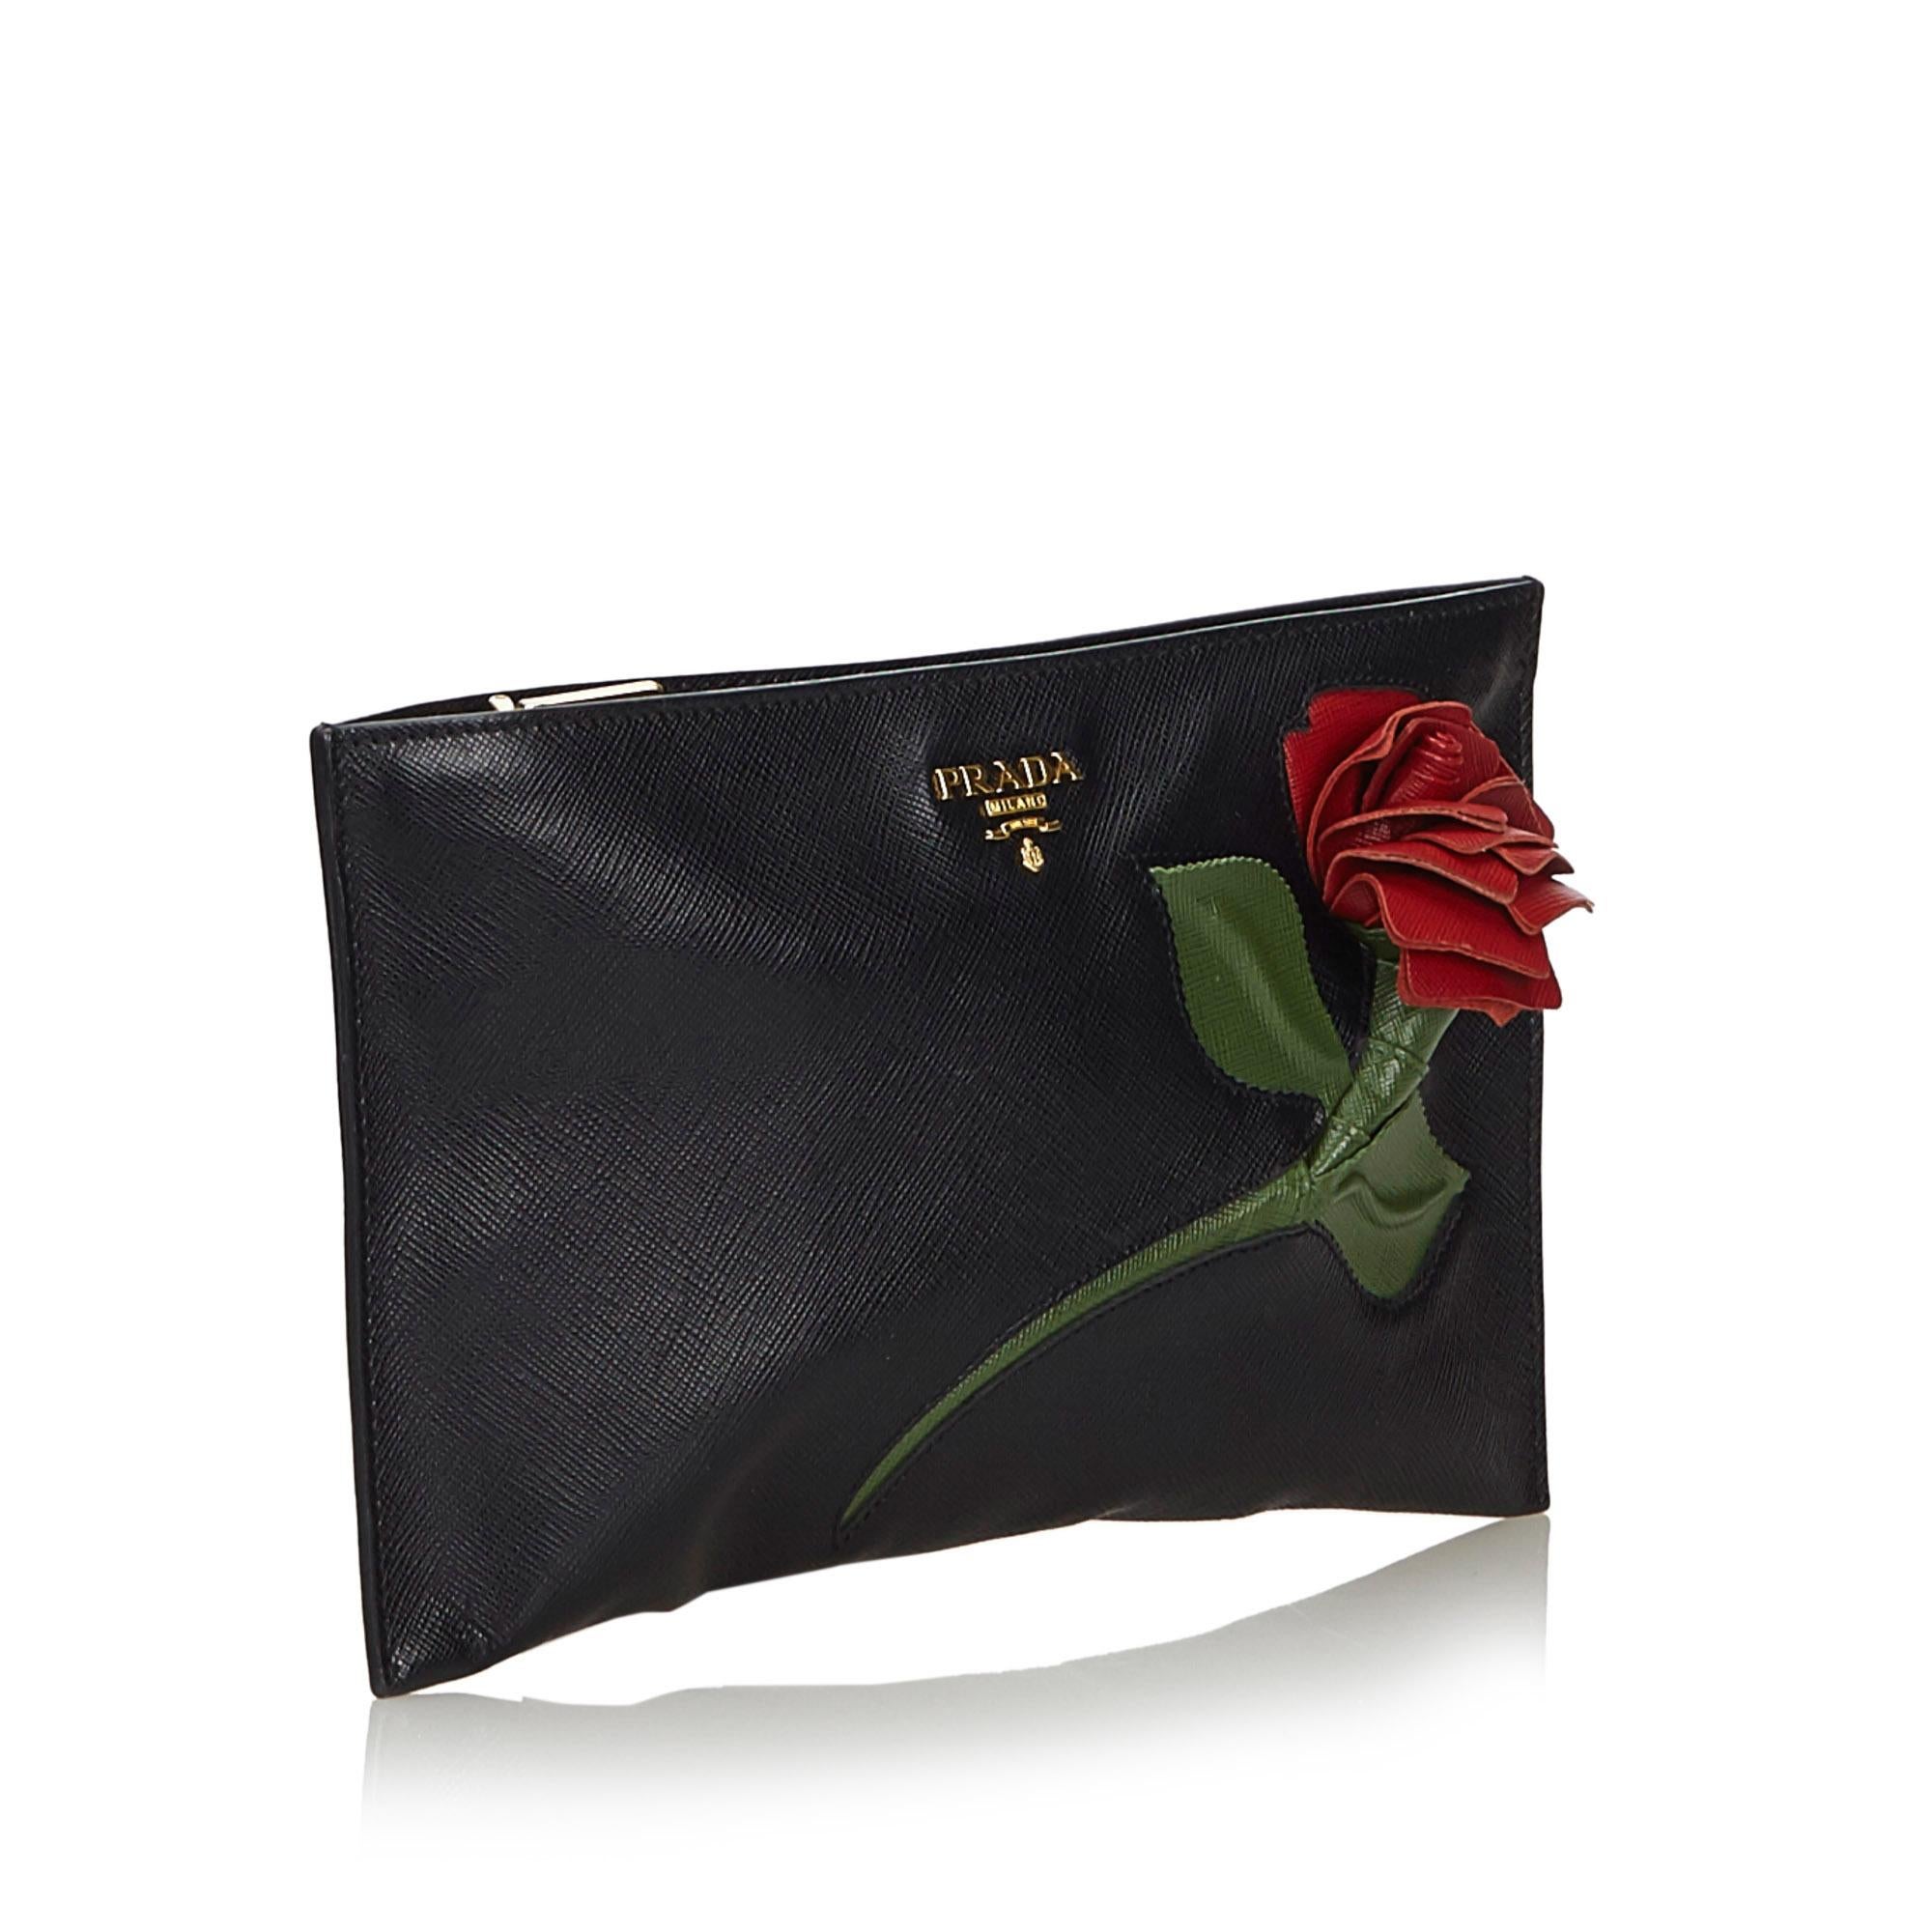 Prada Saffiano Leather Clutch Bag

This clutch bag features a saffiano leather body, a rose detail, a top zip closure, and interior zip and slip pockets. 

Approx. 

Length: 15 cm. Width: 25 cm. 
Depth: 0.5 cm.
